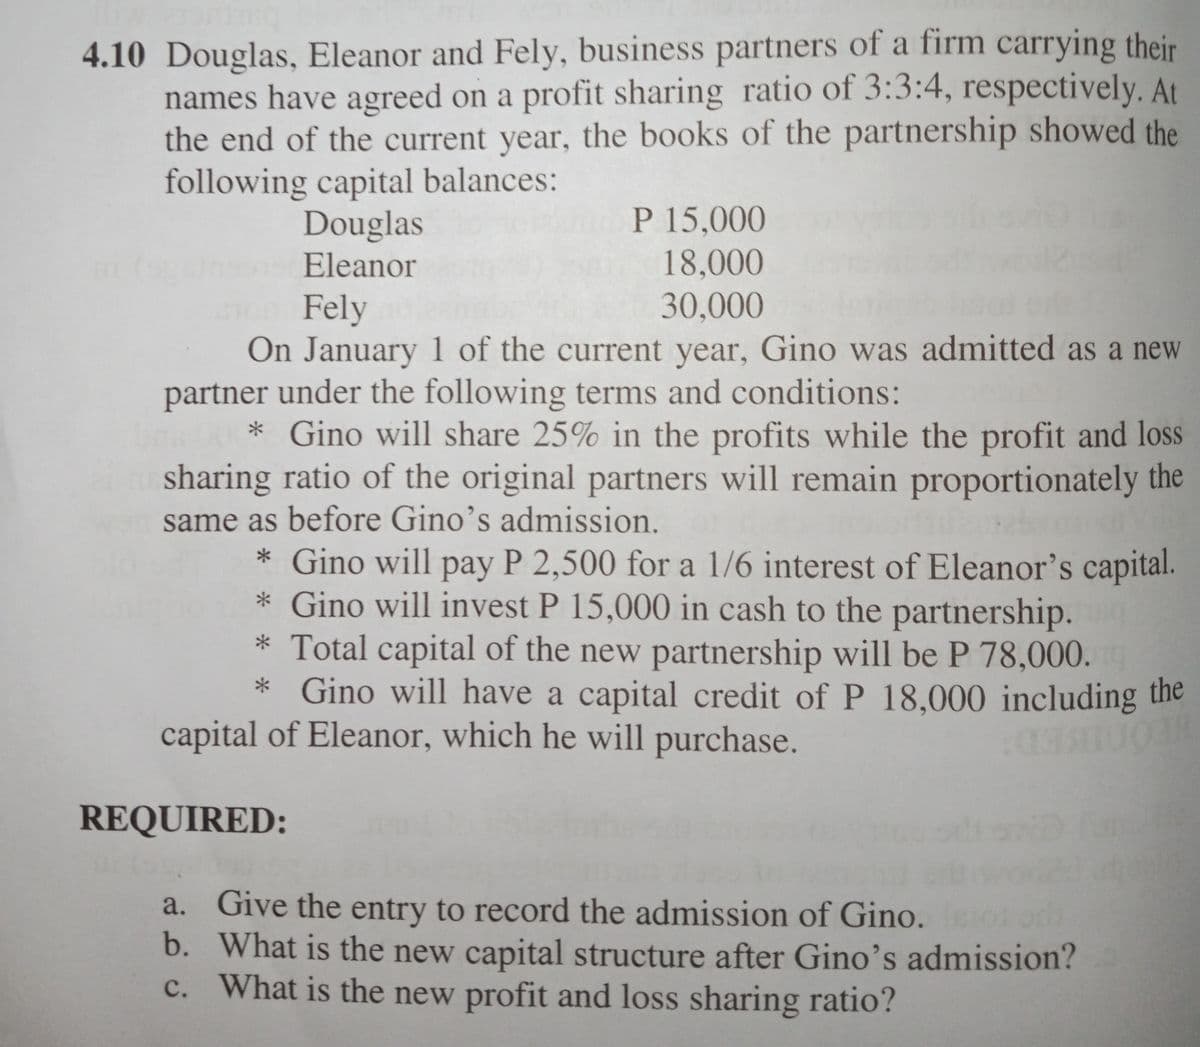 4.10 Douglas, Eleanor and Fely, business partners of a firm carrying their
names have agreed on a profit sharing ratio of 3:3:4, respectively. At
the end of the current year, the books of the partnership showed the
following capital balances:
Douglas
P 15,000
Eleanor
18,000
30,000
Fely
On January 1 of the current year, Gino was admitted as a new
partner under the following terms and conditions:
* Gino will share 25% in the profits while the profit and loss
sharing ratio of the original partners will remain proportionately the
same as before Gino's admission.
* Gino will pay P 2,500 for a 1/6 interest of Eleanor's capital.
* Gino will invest P 15,000 in cash to the partnership.
* Total capital of the new partnership will be P 78,000.
* Gino will have a capital credit of P 18,000 including the
capital of Eleanor, which he will purchase.
REQUIRED:
a. Give the entry to record the admission of Gino.
b. What is the new capital structure after Gino's admission?
c. What is the new profit and loss sharing ratio?
